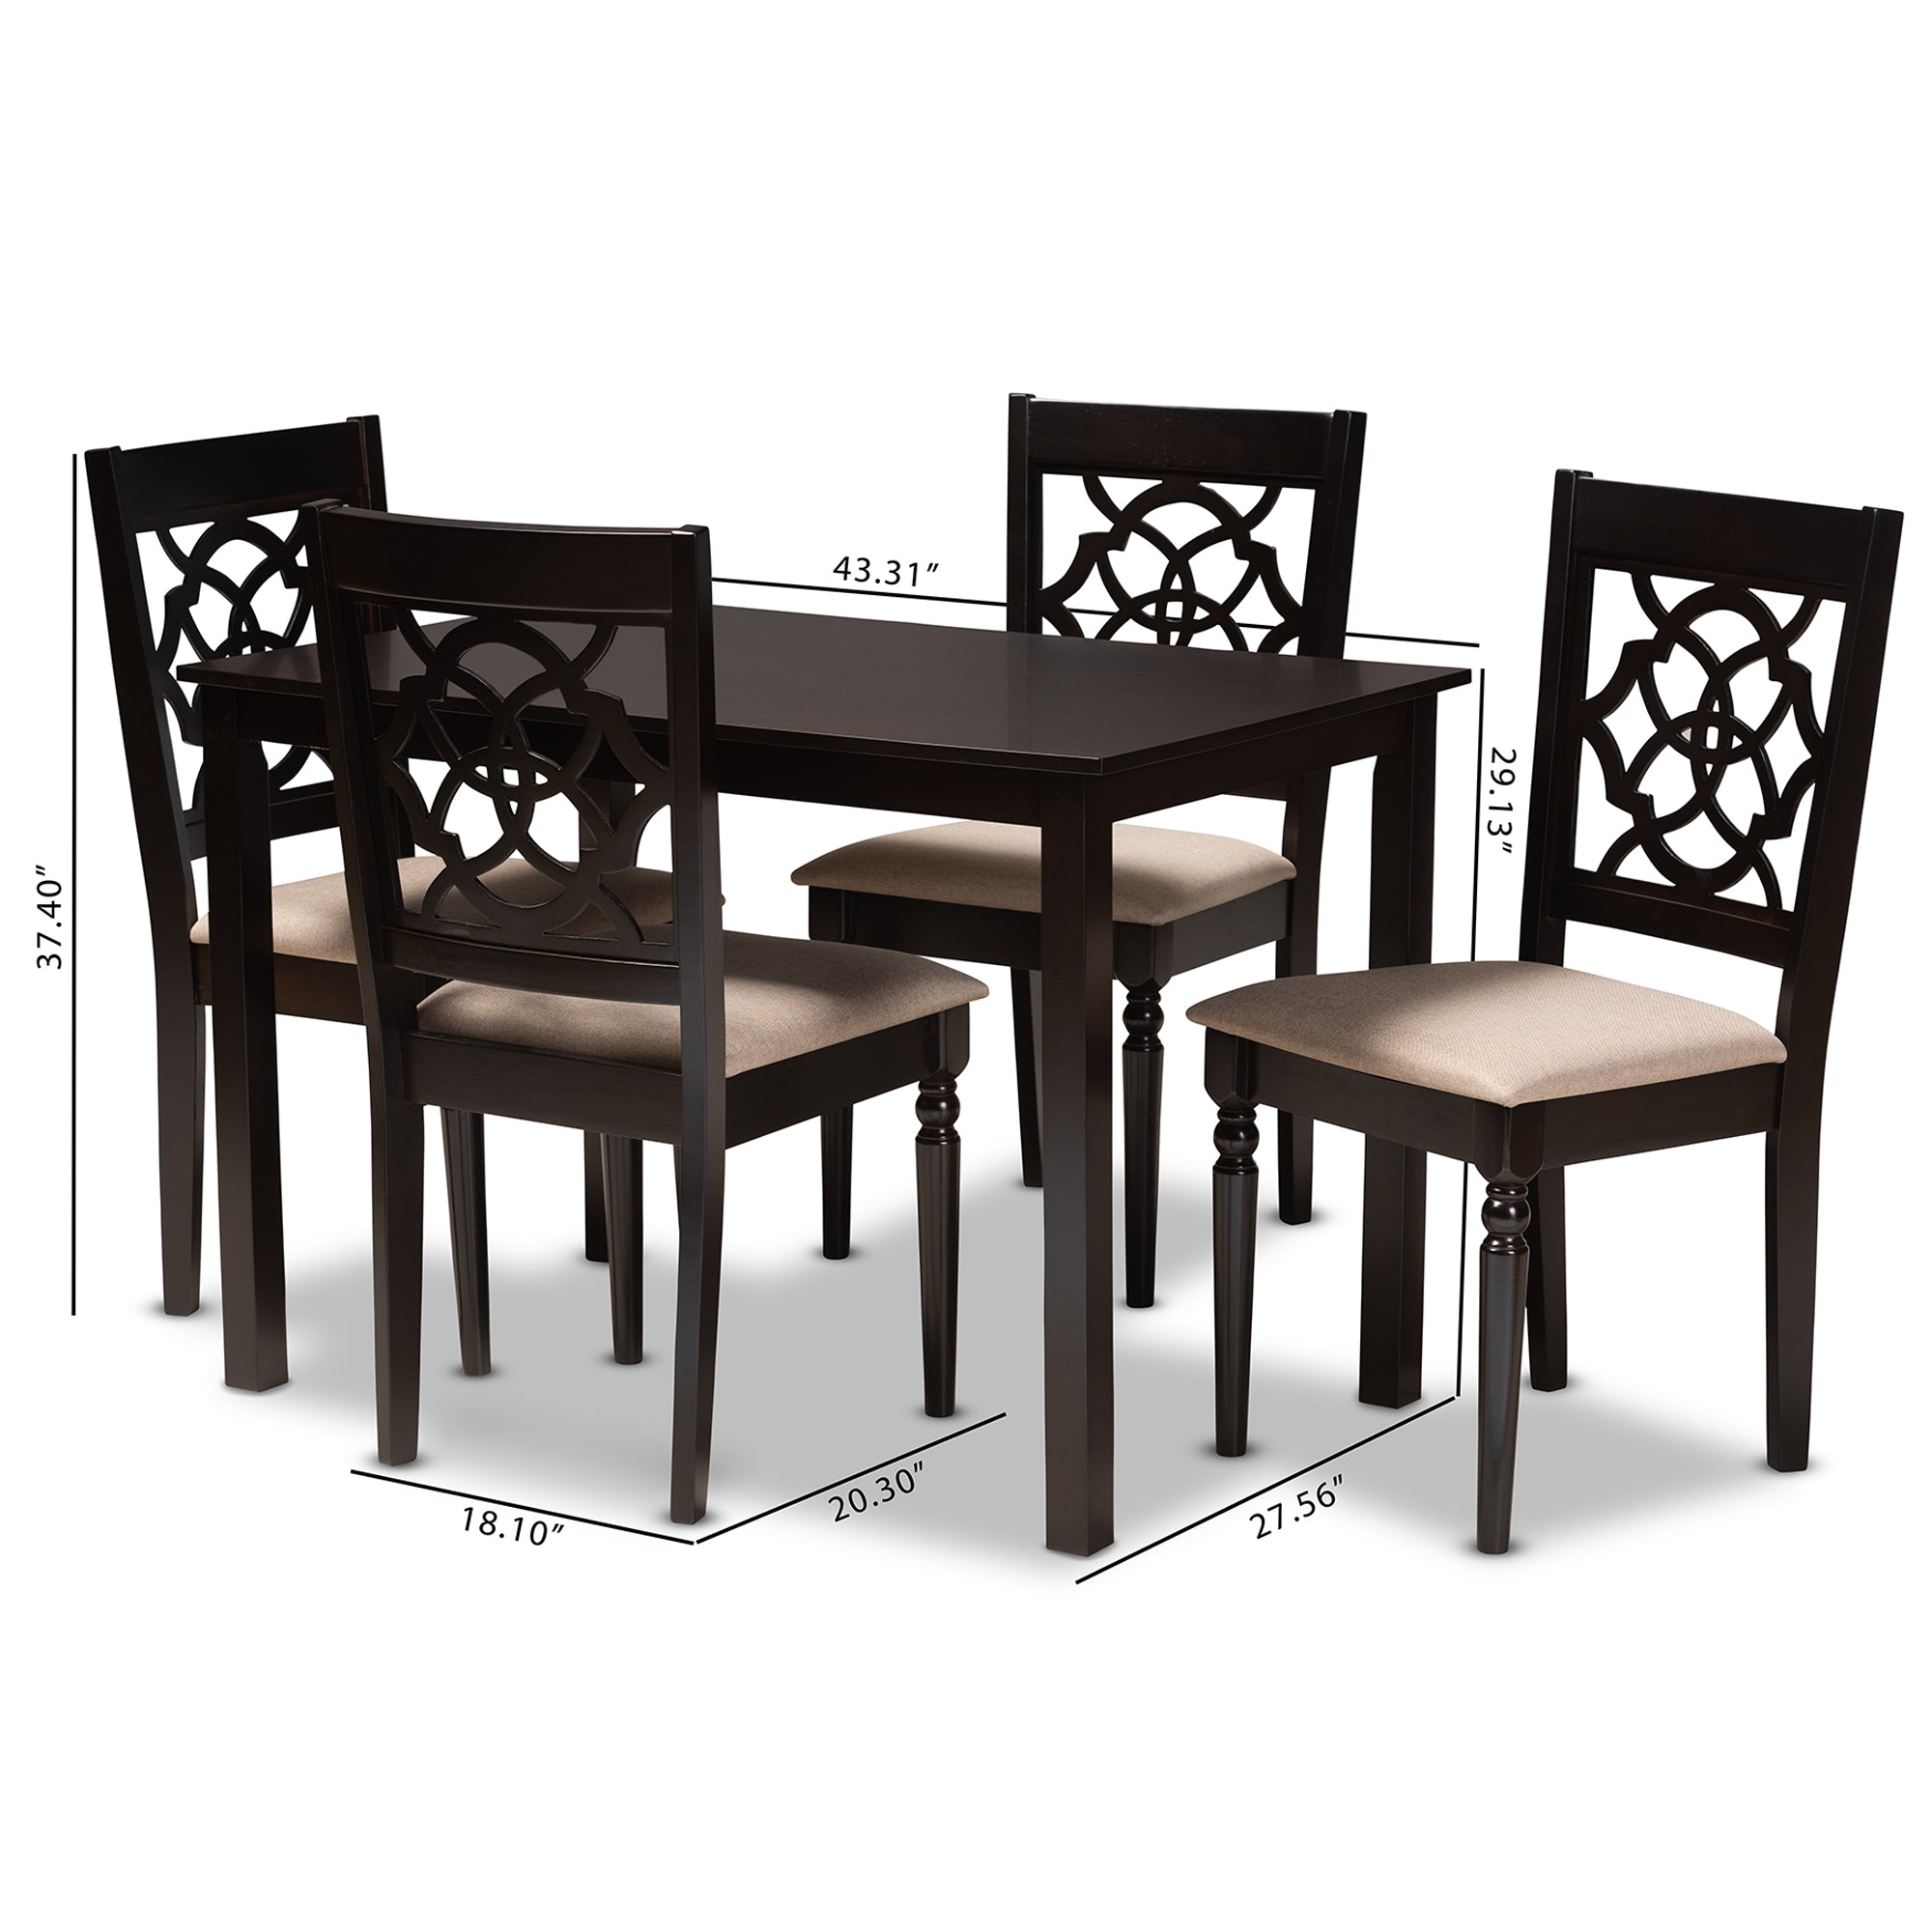 Renaud Contemporary Dining Table & Dining Chairs 5-Piece-Dining Set-Baxton Studio - WI-Wall2Wall Furnishings